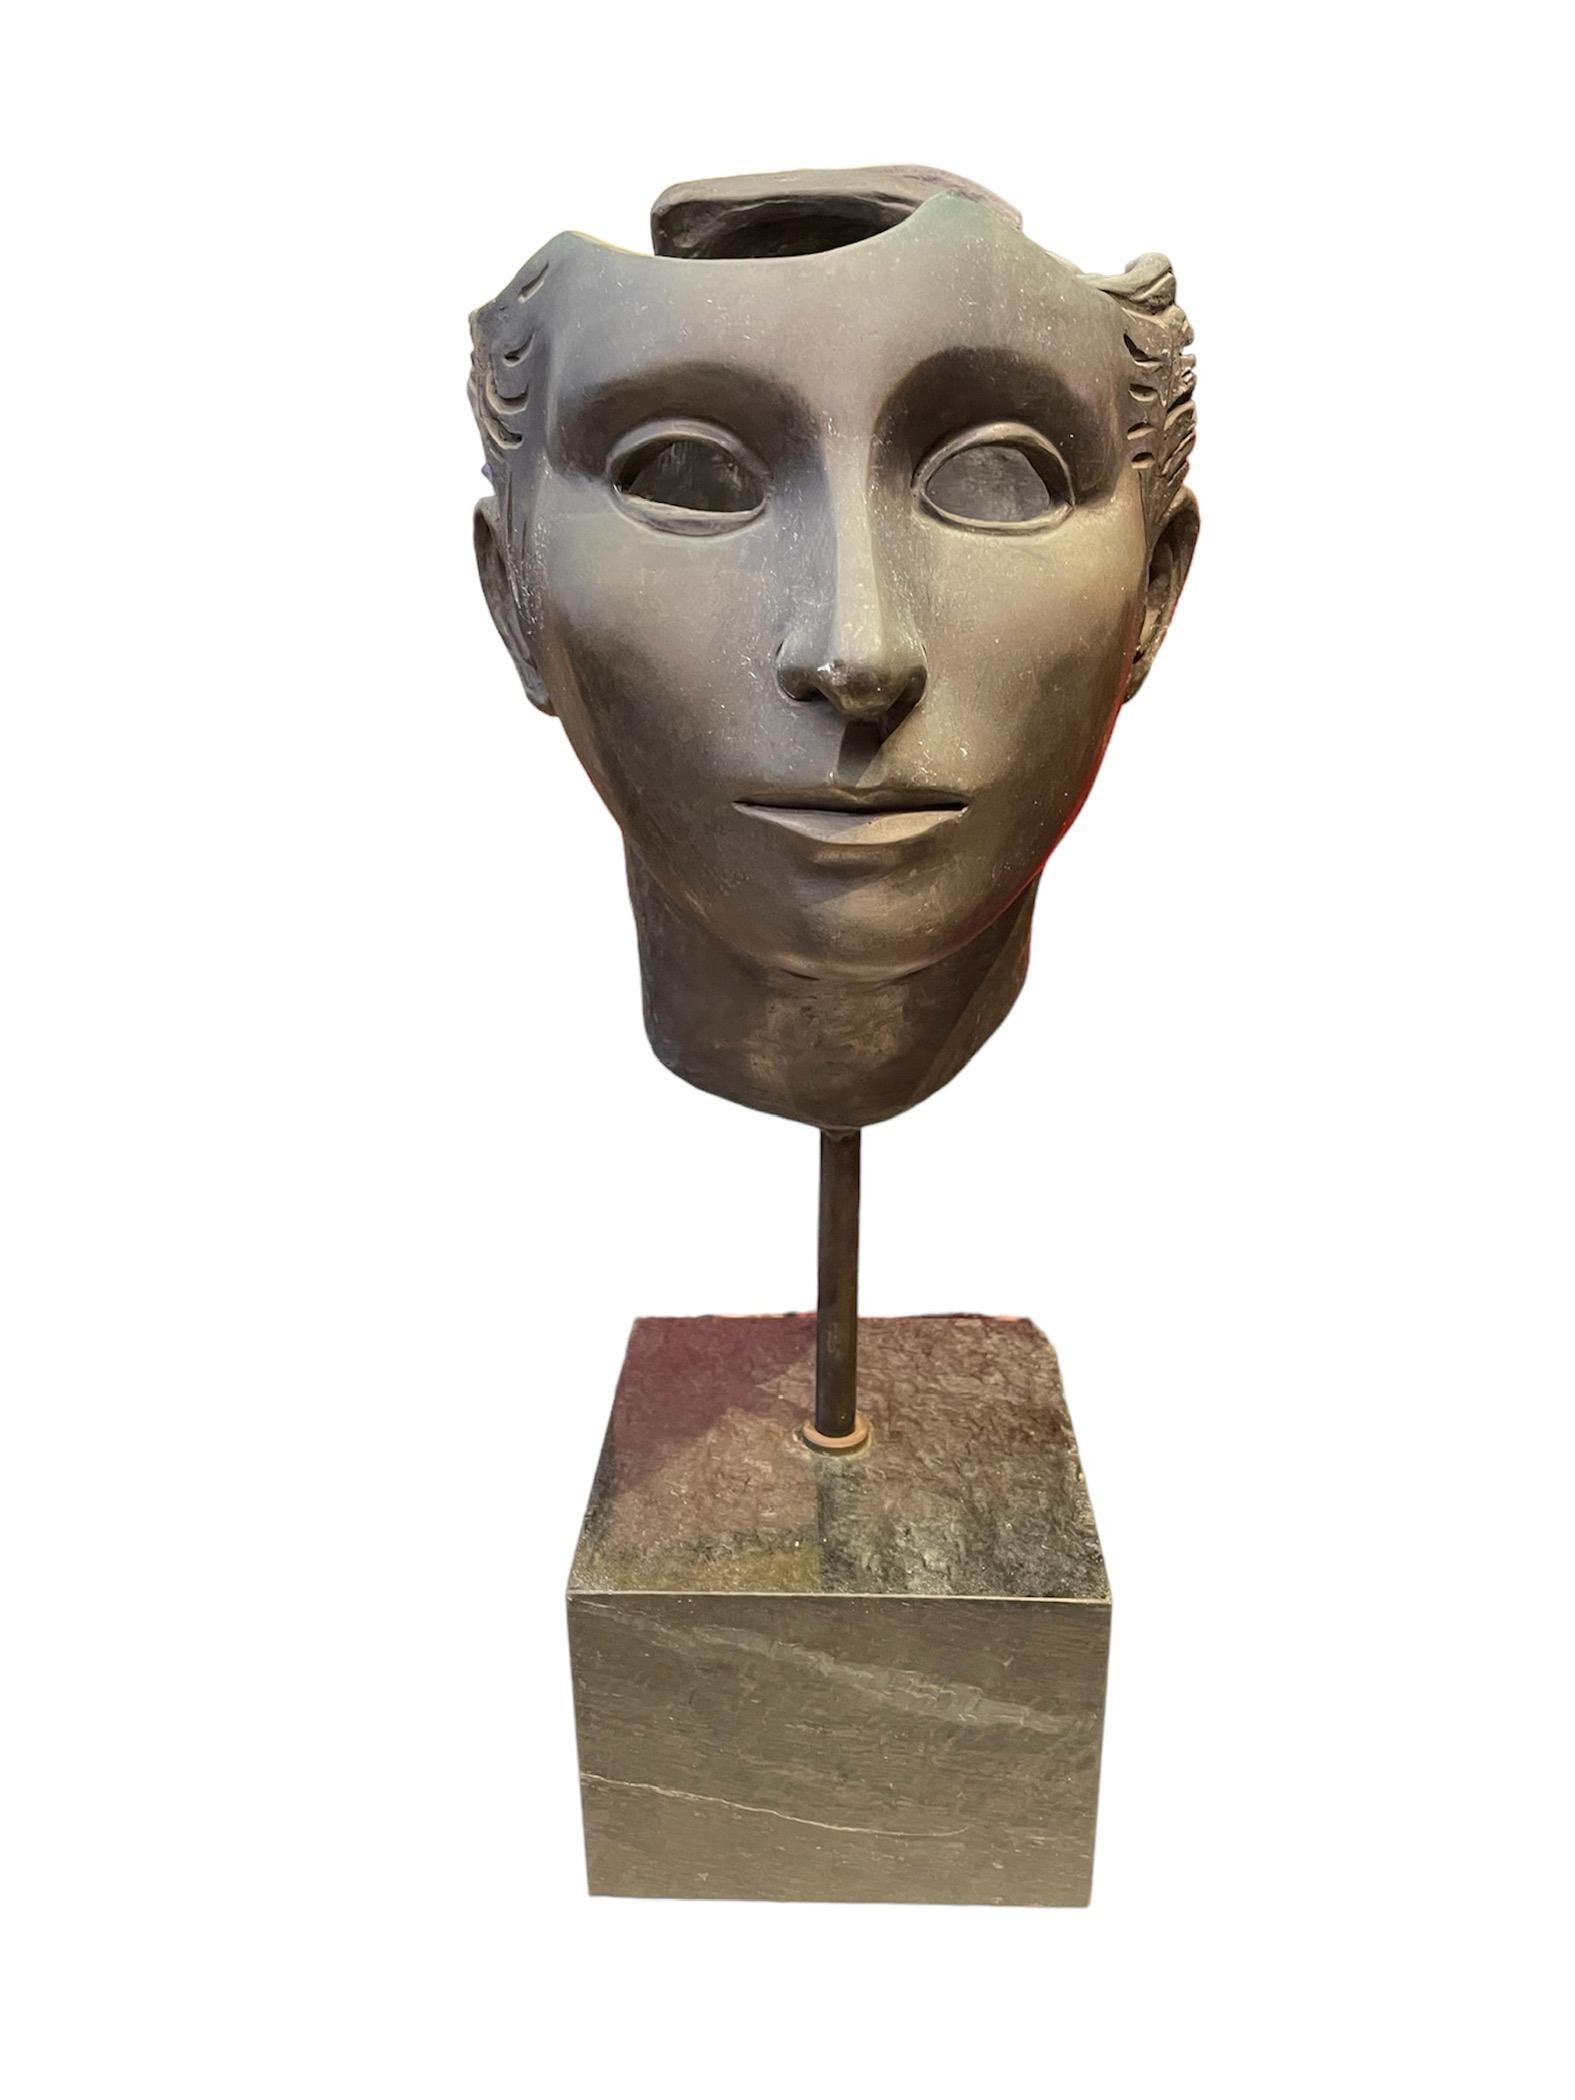 This is a bronze anatomical sculpture of a head and face of a human being made by Alfonso Arana (1927-2005) . He was born in New York City from a Puerto Rican mother and a Mexican father. He studied art in Mexico at the Atelier de Jose Bardasano, at